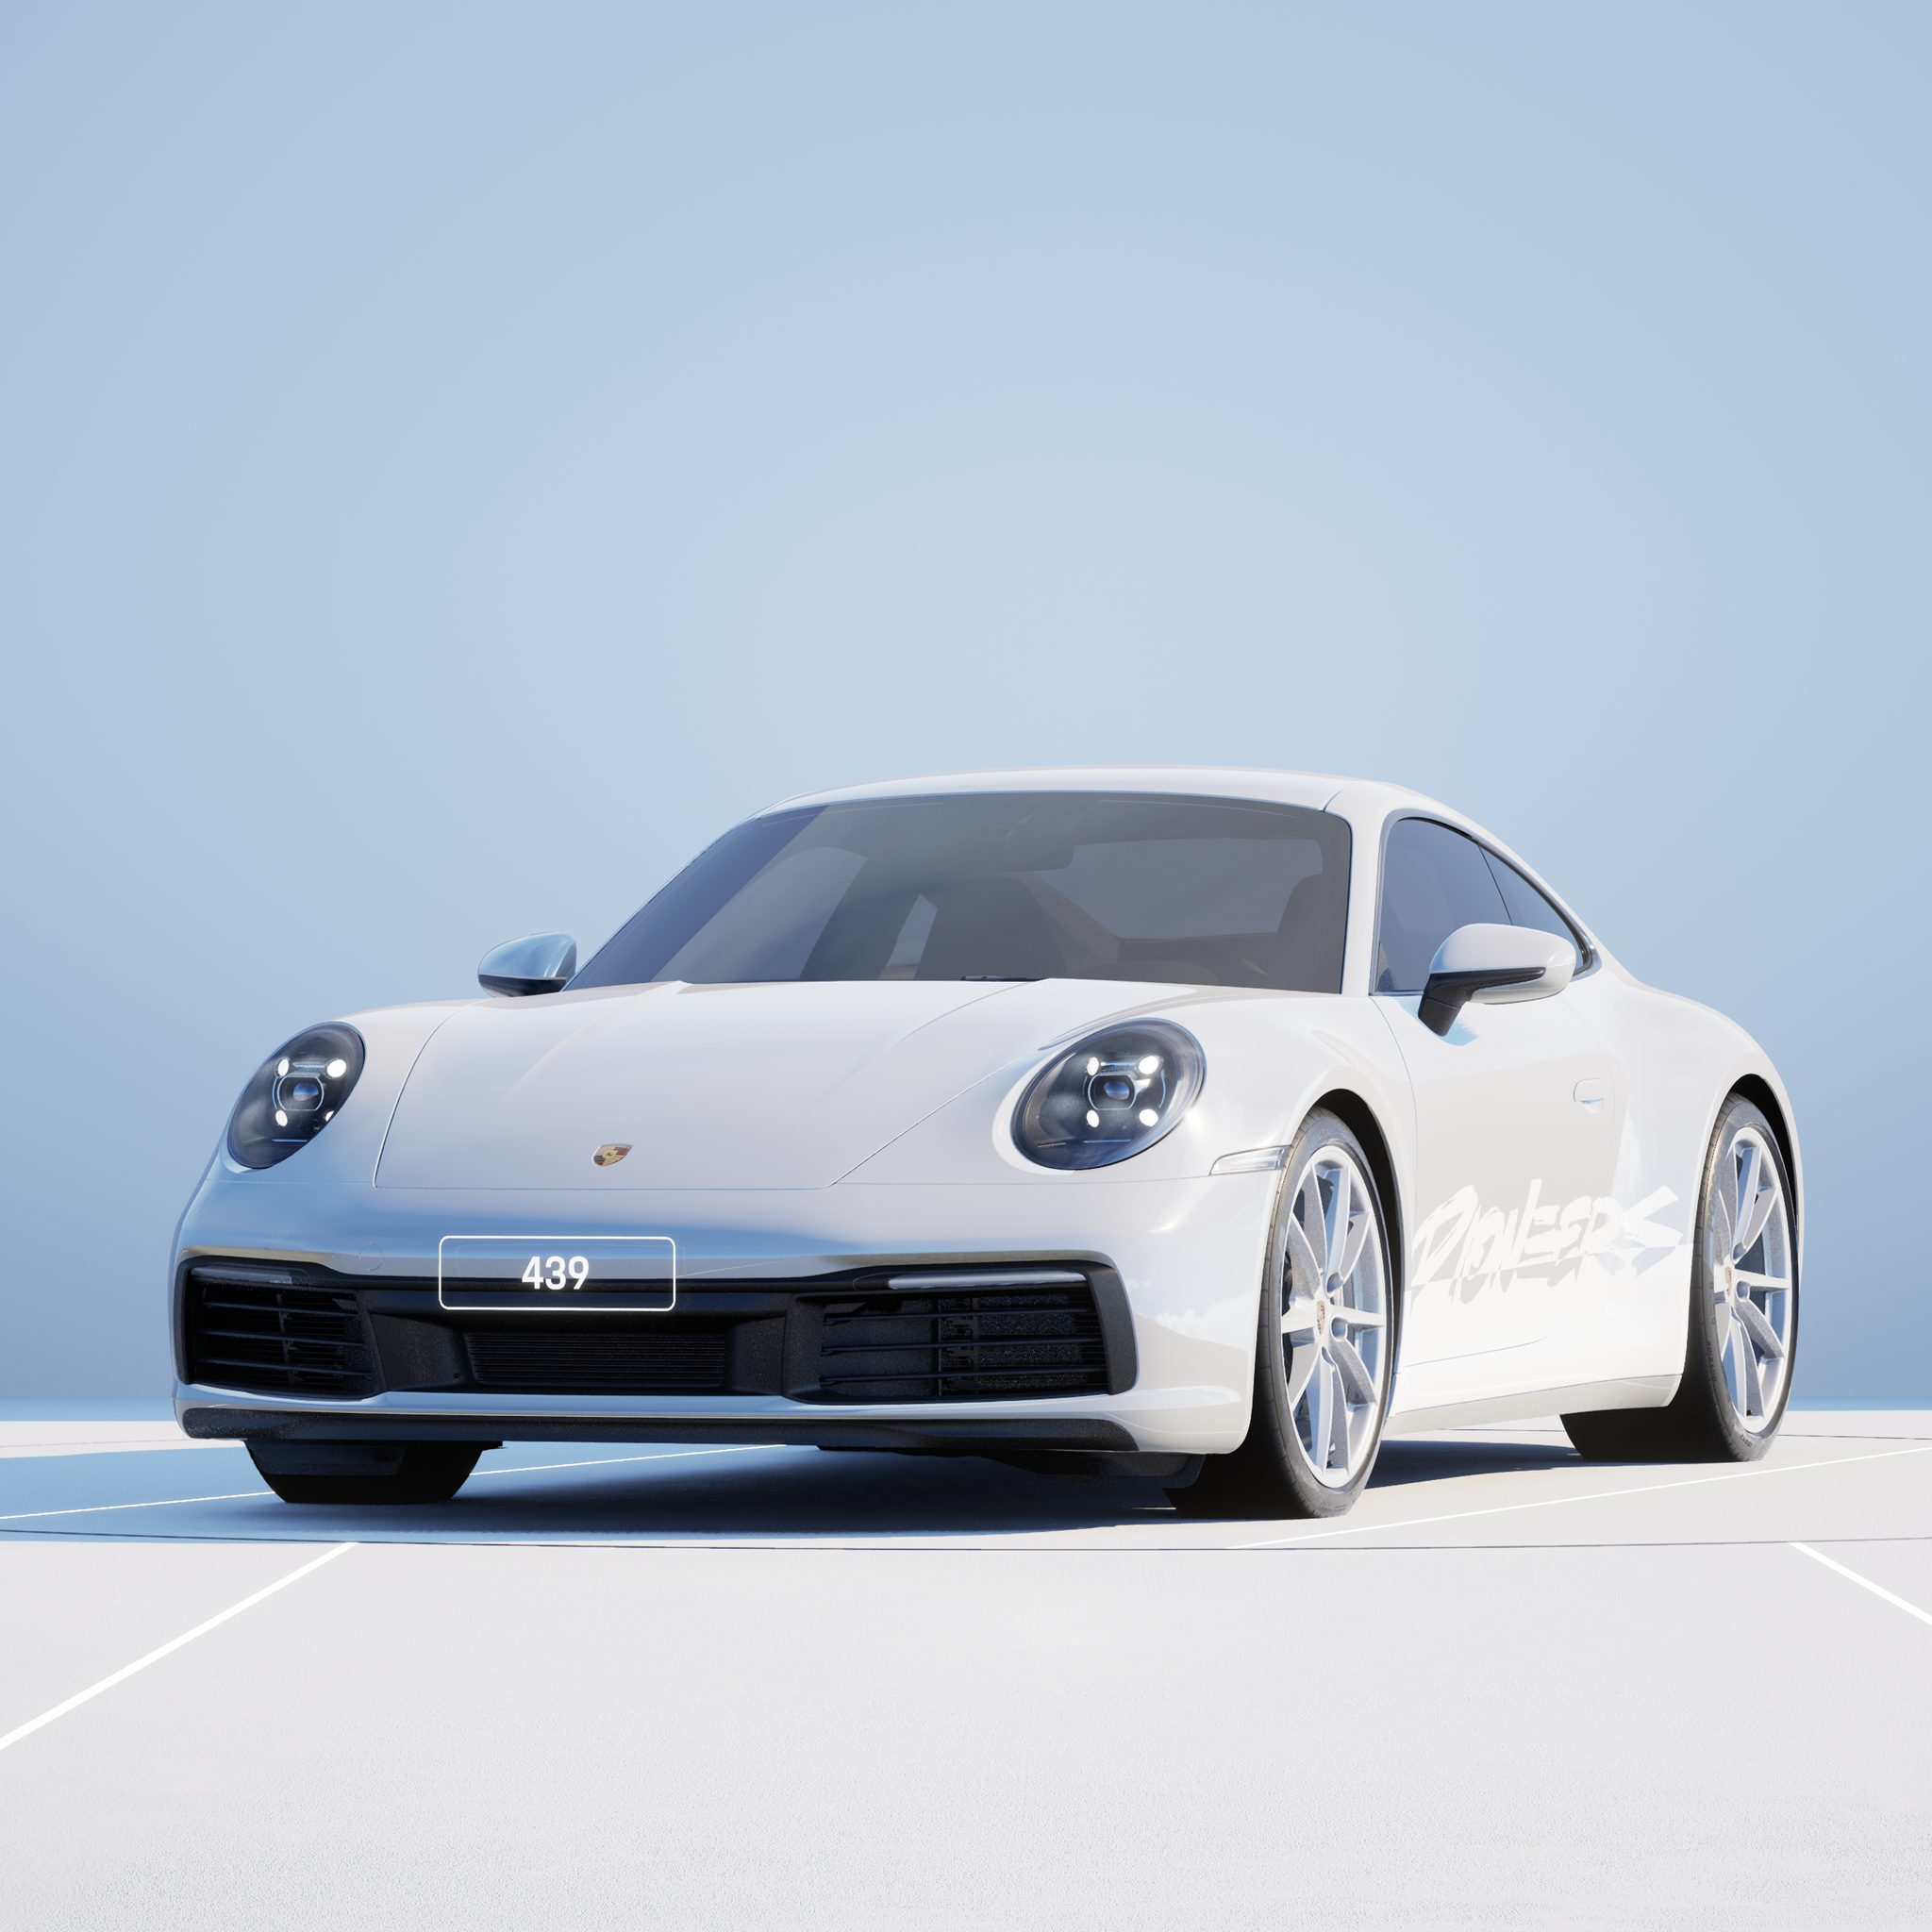 The PORSCHΞ 911 439 image in phase